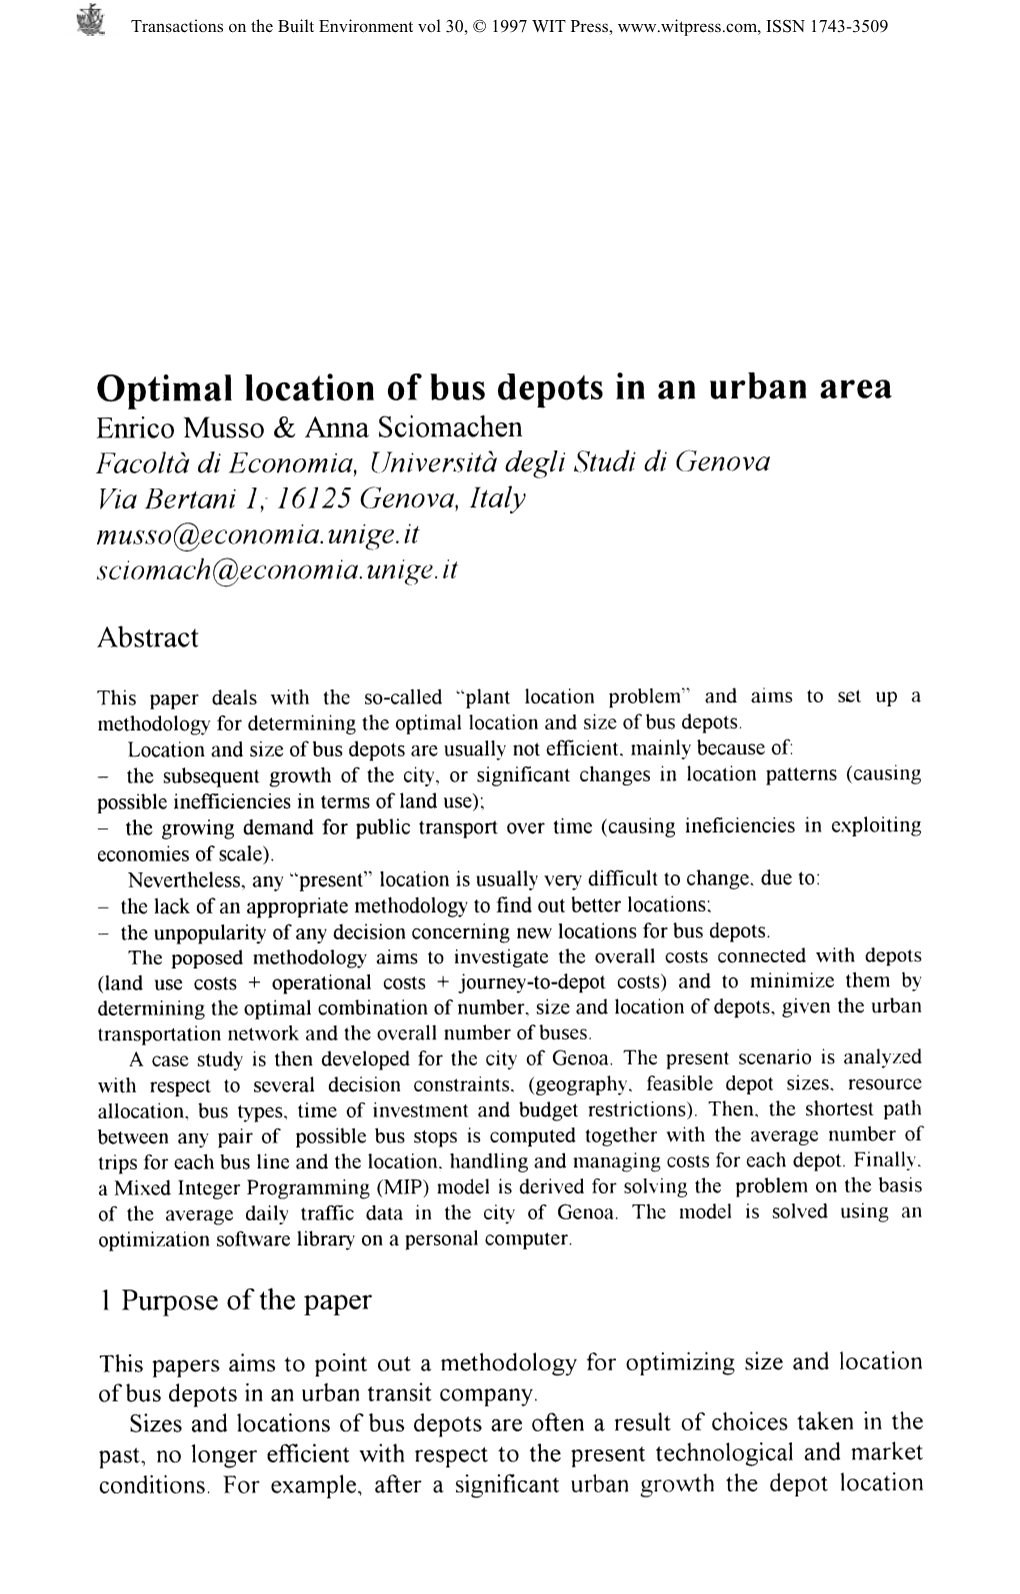 Optimal Location of Bus Depots in an Urban Area Enrico Musso & Anna